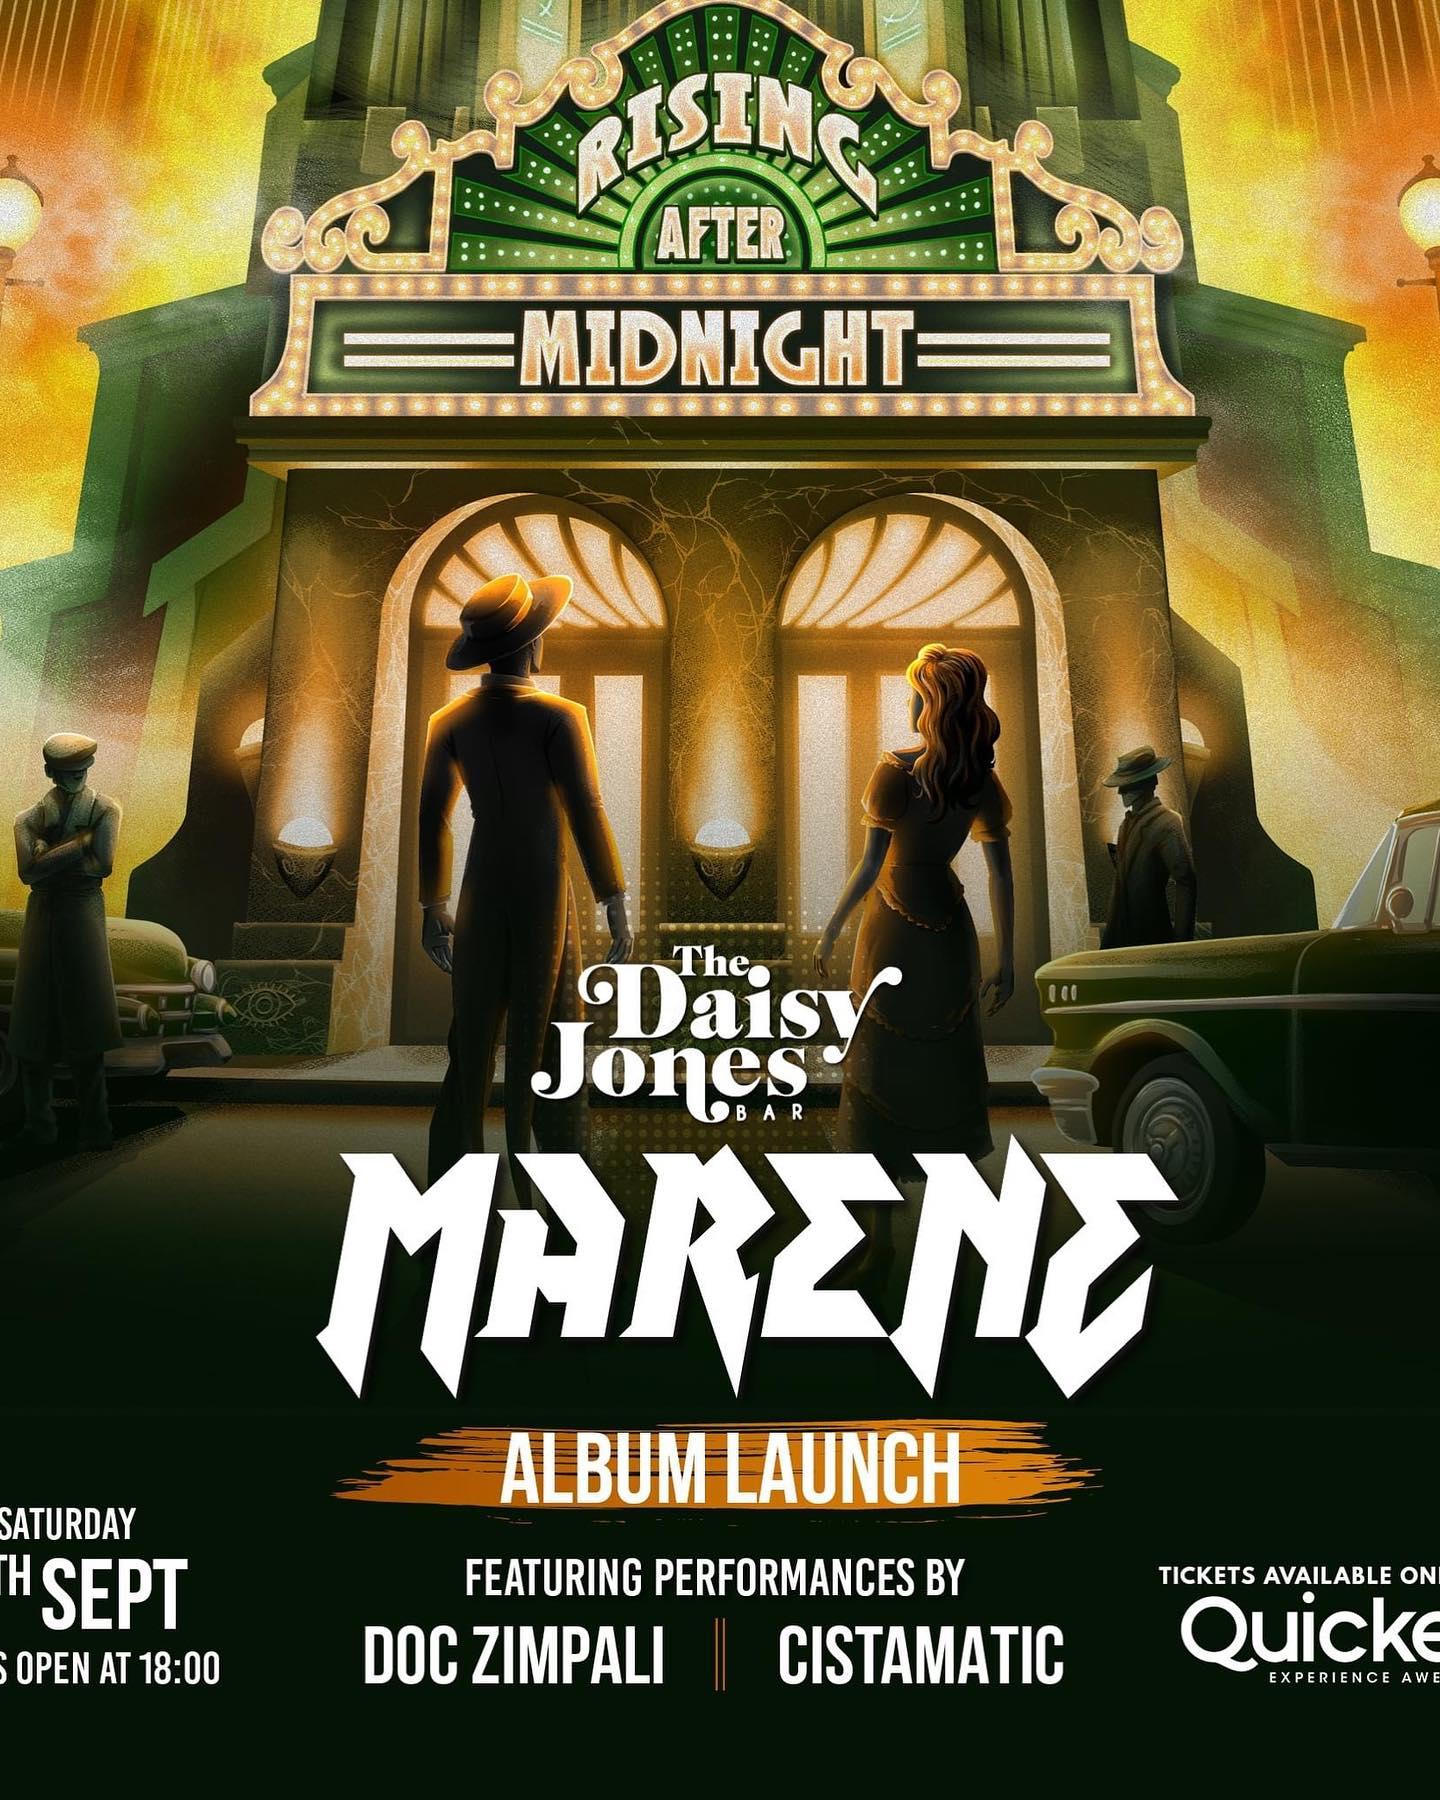 **Unveiling the MARENE Album Launch: A Night of Spectacle and Sounds! 🎶**

Greetings, music aficionados! Get ready for a night of musical magic as we proudly present the **MARENE Album Launch**, an extraordinary evening filled with captivating melodies, beloved classics, and brand new tunes. Join us for a musical journey that will leave you spellbound, alongside fantastic guest performances by **Doc Zimpali** and **Cistamatic**. All set against the backdrop of great drinks, delectable food, and the crisp Stellenbosch air.

**Event Highlights:**
🏢 Venue: THE DAISY JONES BAR
📅 Date: Saturday, September 9, 2023
⏰ Doors Open: 18h00
🎸 Bands Play: 20h00

**Featured Acts:**
Prepare to be mesmerized by the enchanting sounds of:
- **MARENE**
- **CISTAMATIC**
- **DOC ZIMPALI**

**Tickets:**
Secure your spot in this musical extravaganza by grabbing your tickets now. Visit the following link to secure your place: [Ticket Link](https://qkt.io/EWGIUJ)

**Event Details:**
The night's itinerary is as follows:
- Doors open at 18h00, so come early and soak in the atmosphere.
- The bands will start playing at 20h00, ensuring you're in for an unforgettable musical journey.
- Ticket price: R100 online or R120 at the door.
- Food and drinks will be available to tantalize your taste buds throughout the evening.
- The Daisy Jones Bar, situated at Summerhill Wines in Stellenbosch, sets the perfect stage for this musical spectacle.

**Important Reminders:**
- Right of admission is reserved.
- Please note that this event is strictly for those above 18 years old.
- Be prepared to groove to the rhythms, immerse yourself in the melodies, and experience a night that will resonate in your hearts and memories.

Join us for an evening of musical splendor as we celebrate the **MARENE Album Launch**. Let the melodies sweep you away, the beats move your soul, and the camaraderie create lasting memories. Mark your calendars and secure your tickets for an exceptional night of music and merriment. See you there! 🎵🎉